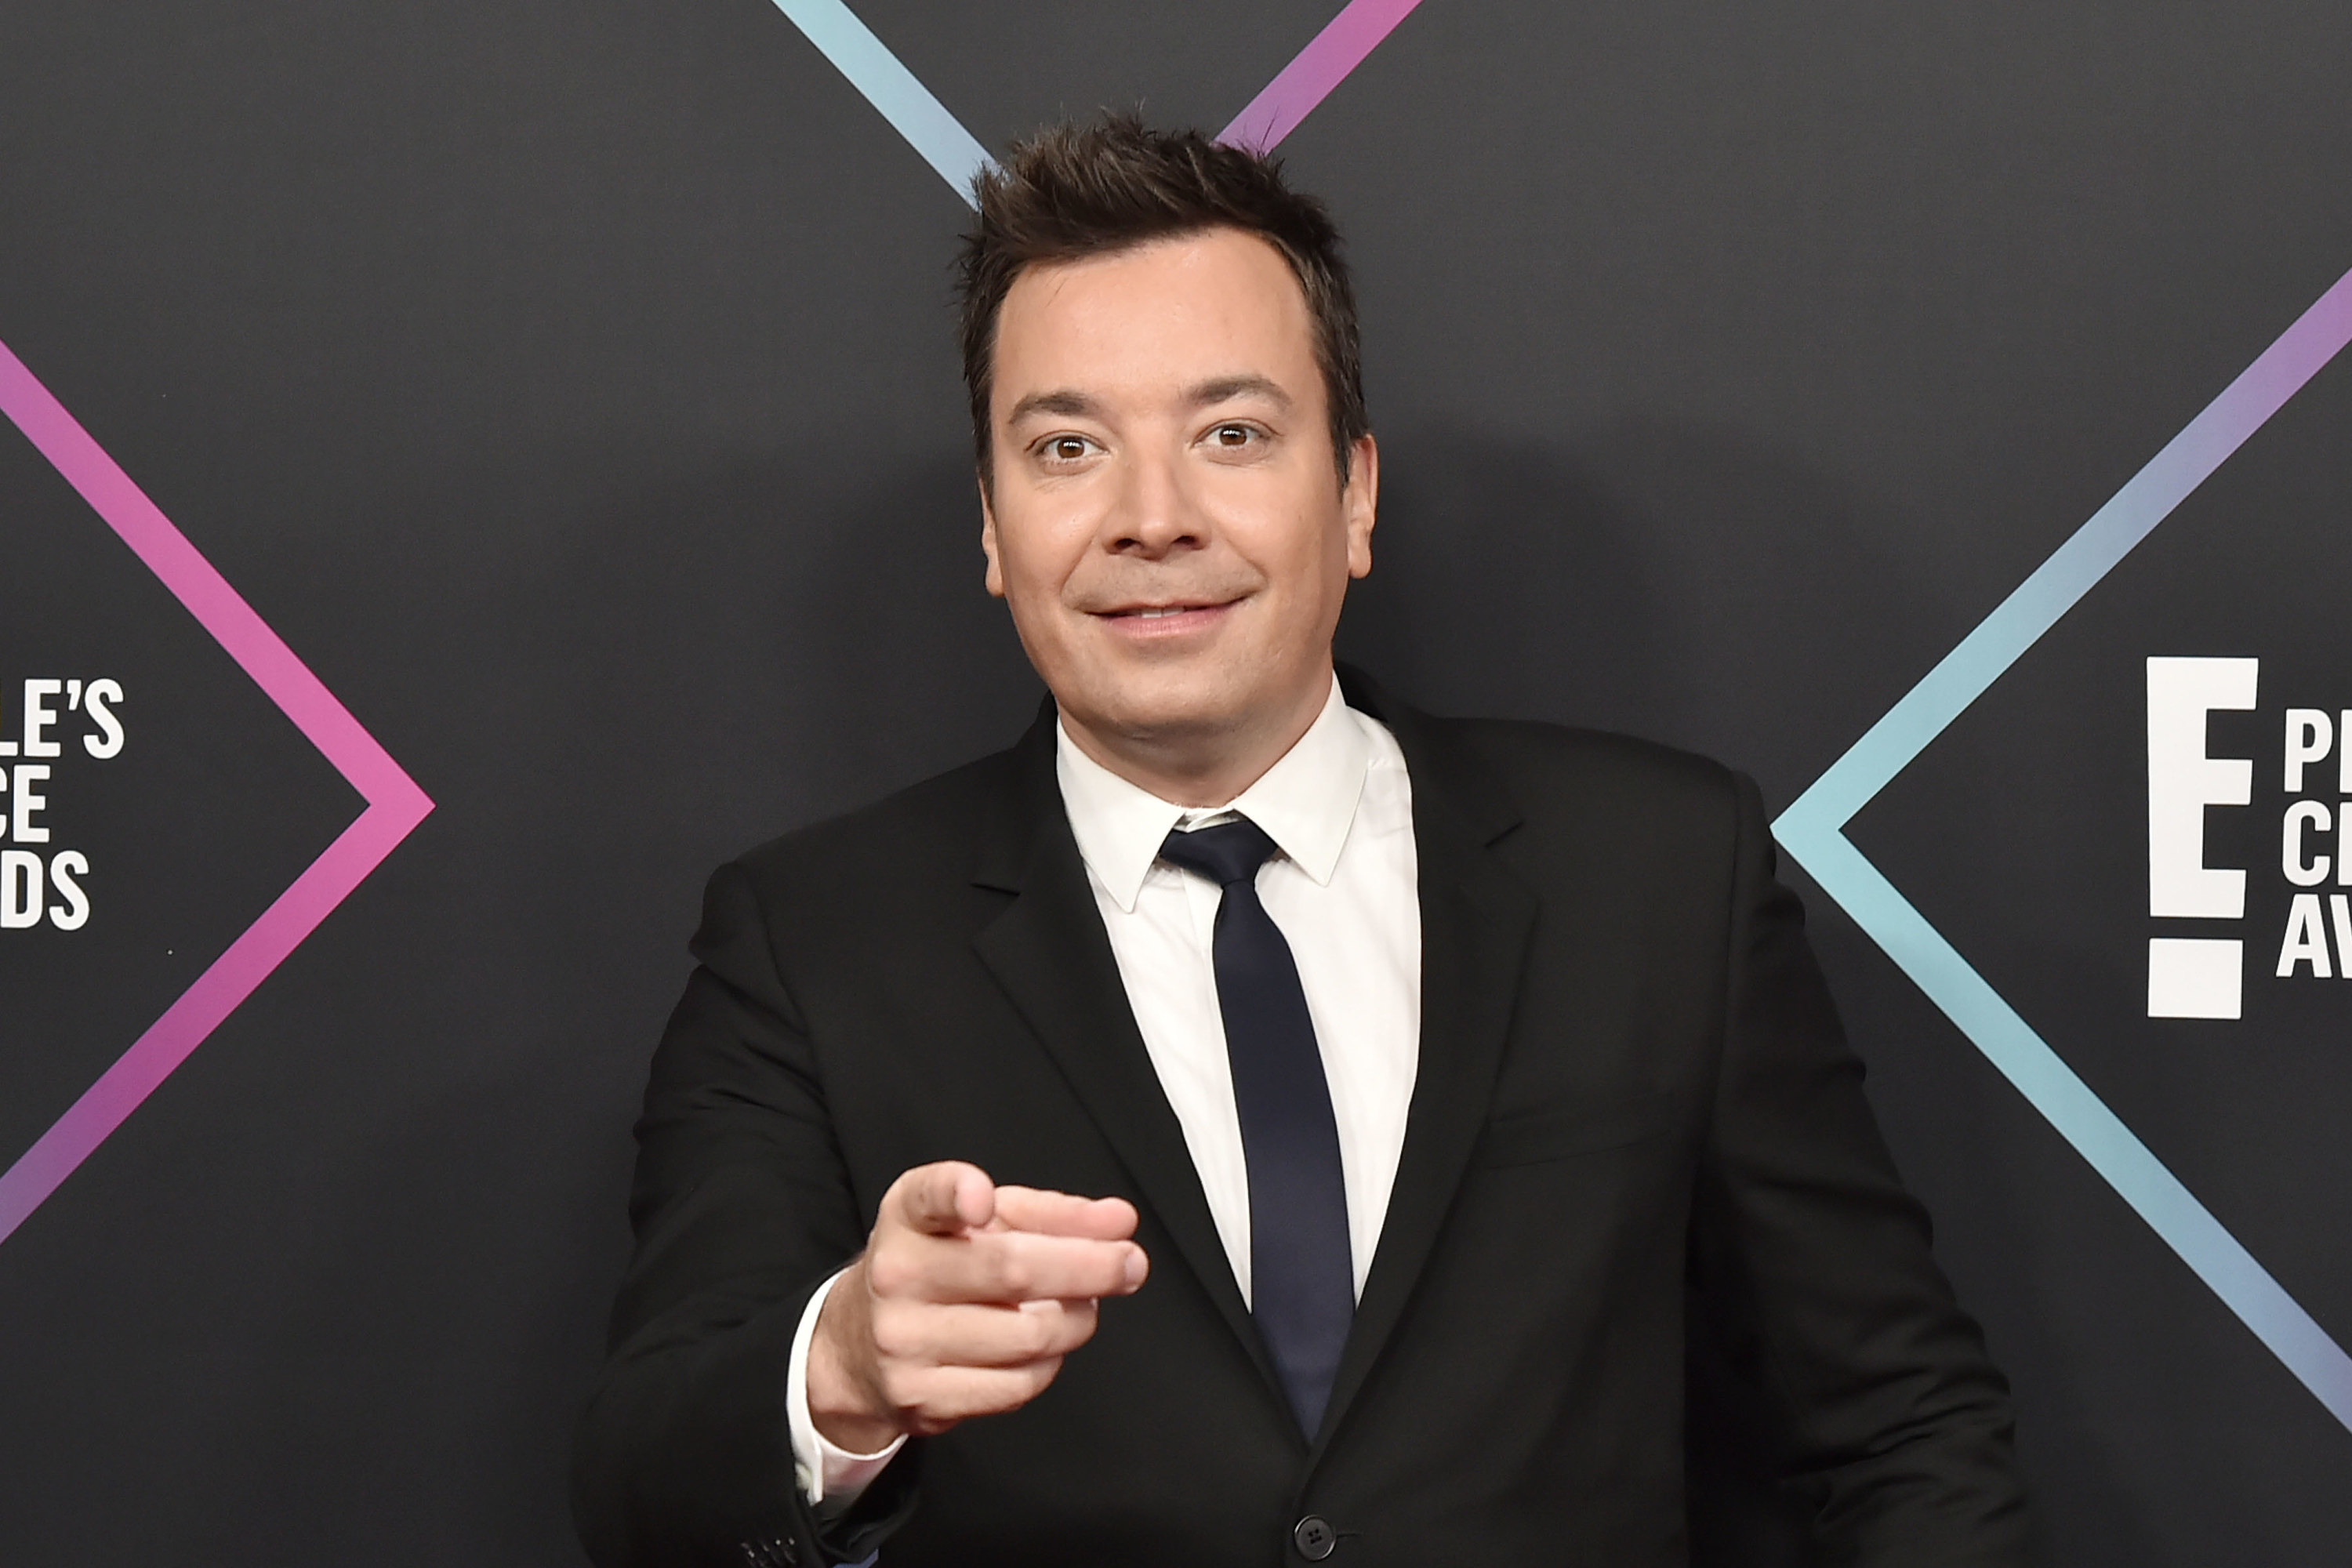 Jimmy pointing at the camera on the red carpet